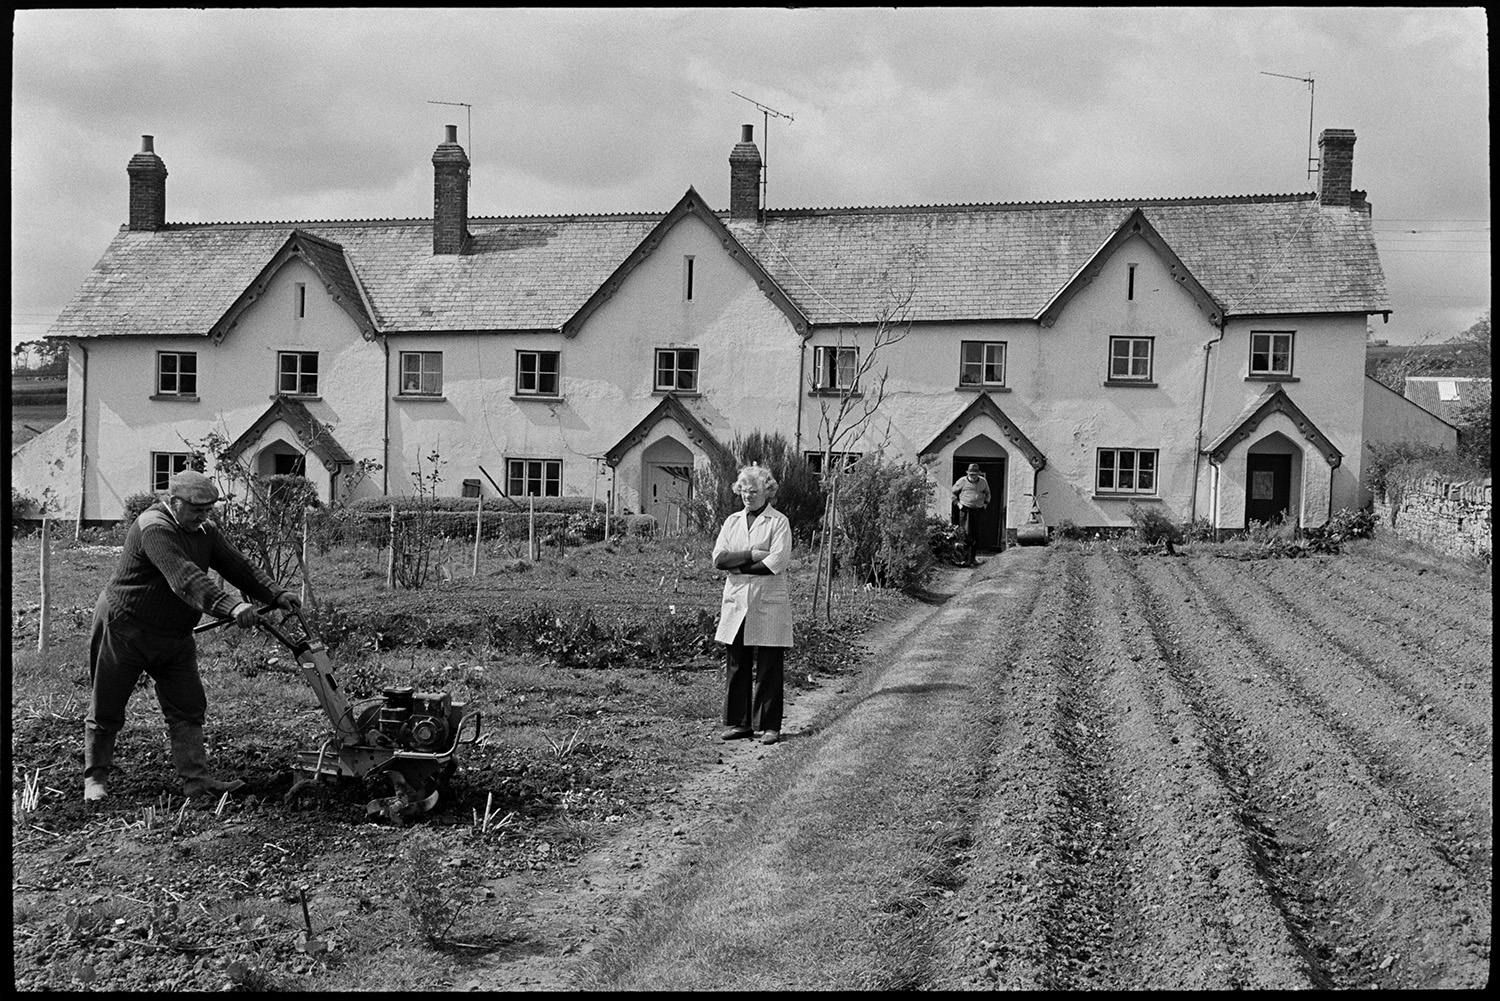 Man using rotavator digger in garden of estate cottages. <br />
[A man using a rotavator to turn the soil in a garden in front of a terrace of estate cottages in Merton. A woman and another man are watching him.]